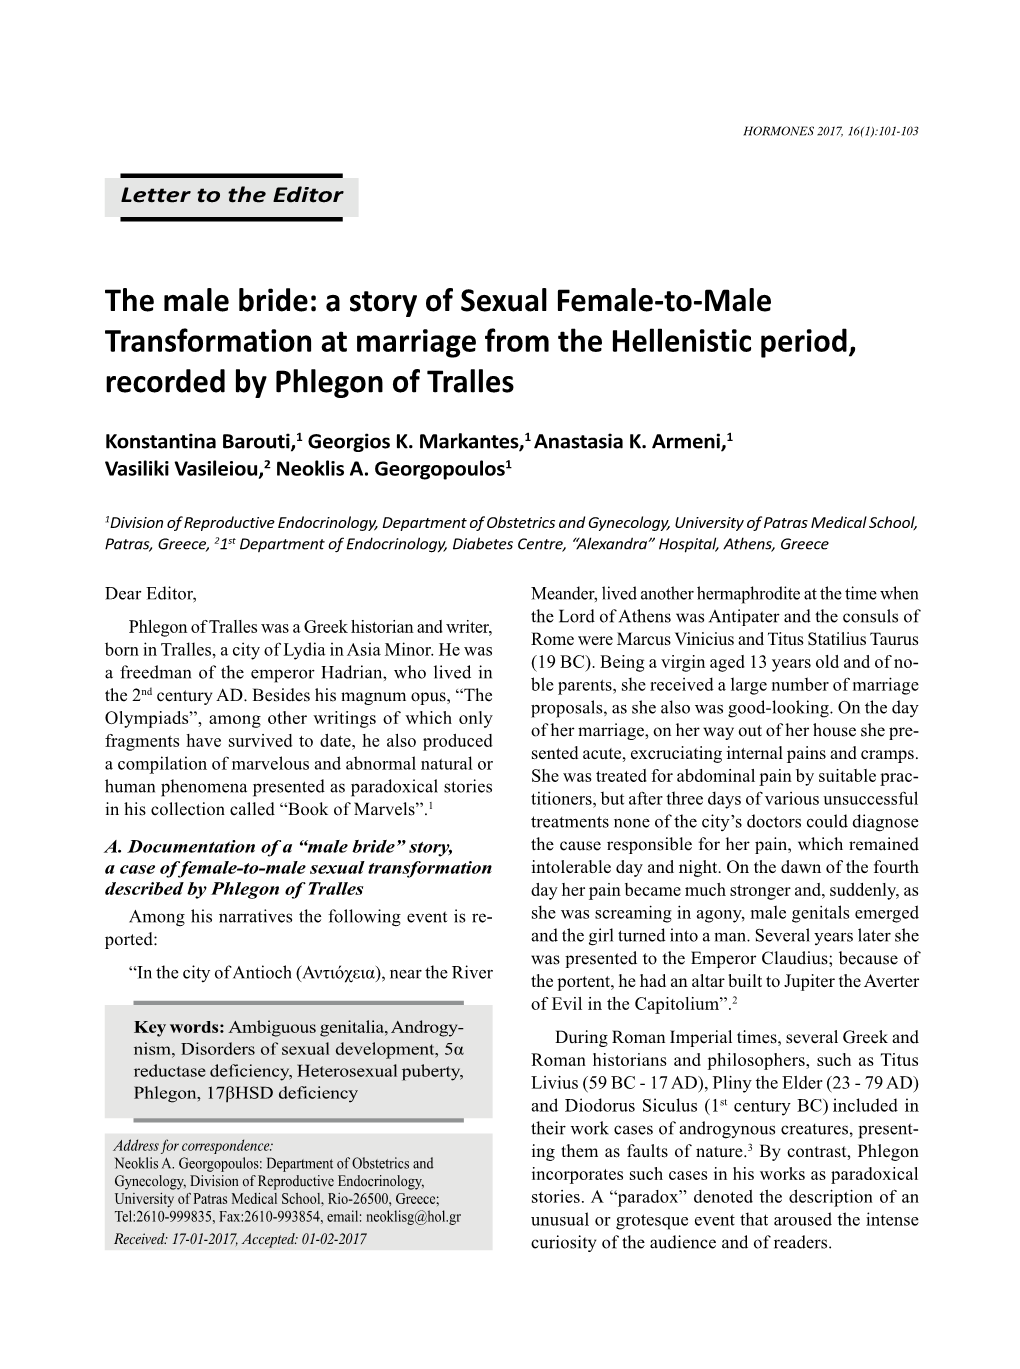 A Story of Sexual Female-To-Male Transformation at Marriage from the Hellenistic Period, Recorded by Phlegon of Tralles